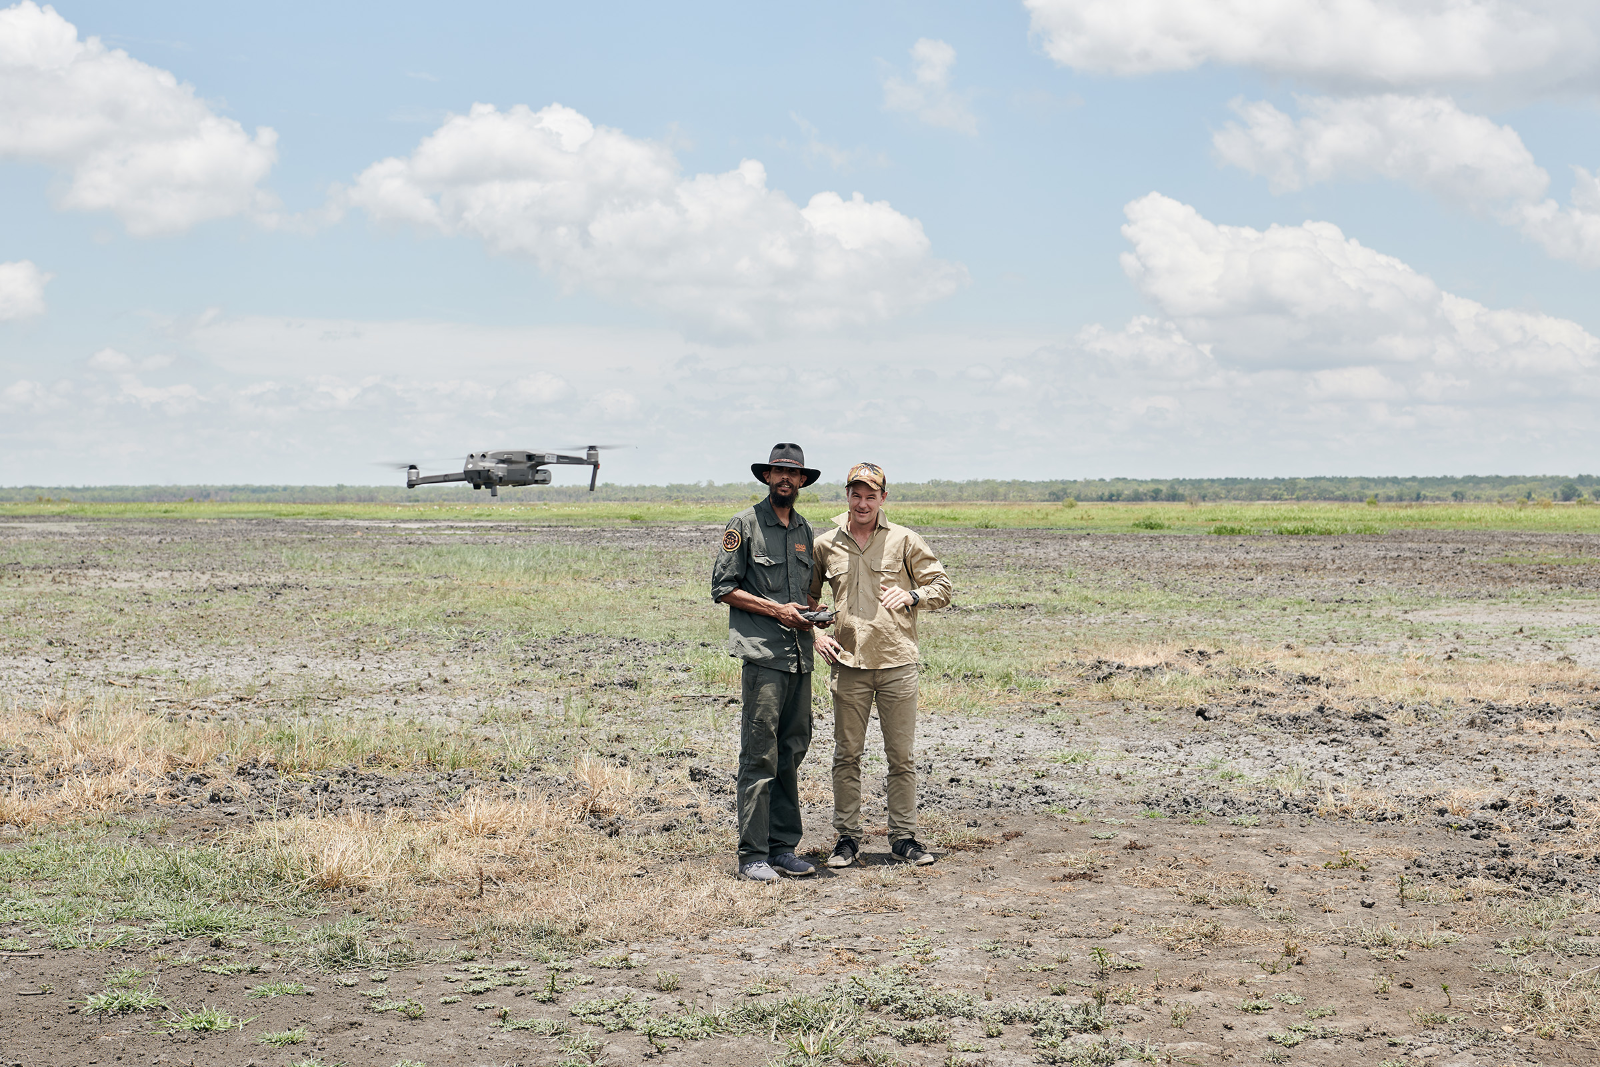 Kadeem May and Justin Perry prepare to fly a drone over wetlands in Kakadu, photo Microsoft.